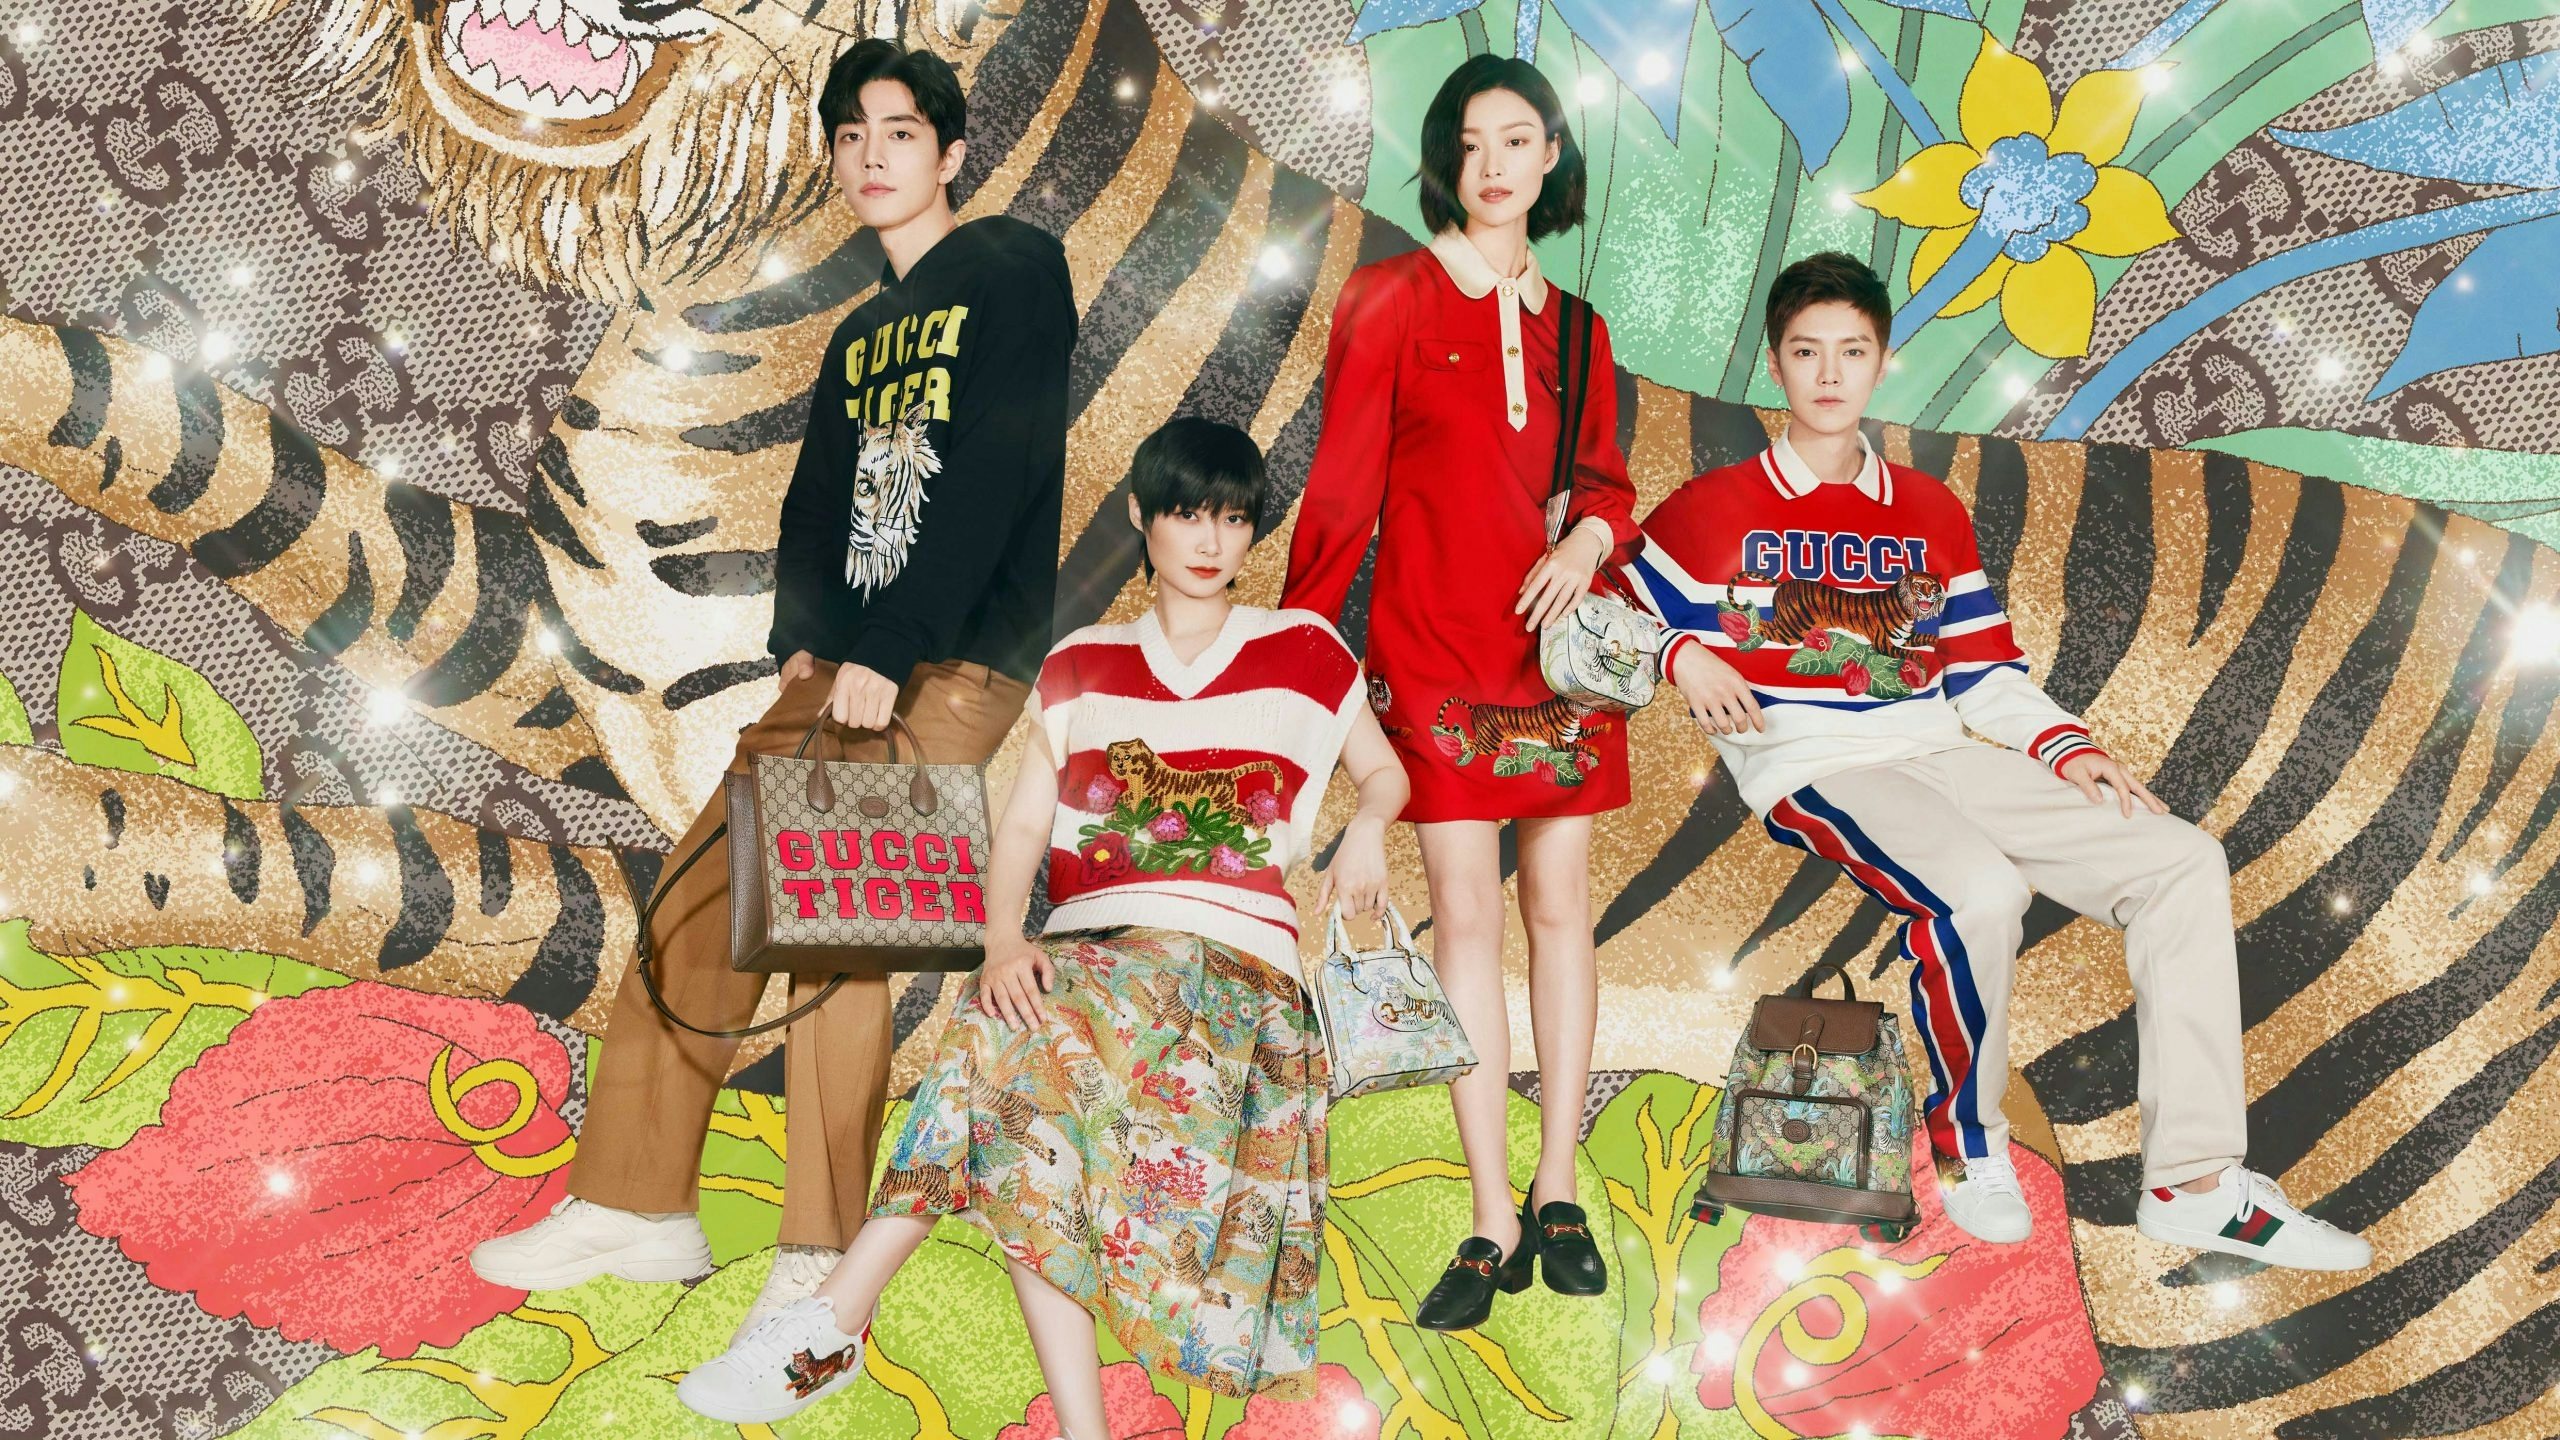 Against an illustrated background of tigers and greenery, Gucci created a family reunion scene with global brand ambassadors, including Chris Lee, Ni Ni, Lu Han, and Xiao Zhan. Photo: Courtesy of Gucci